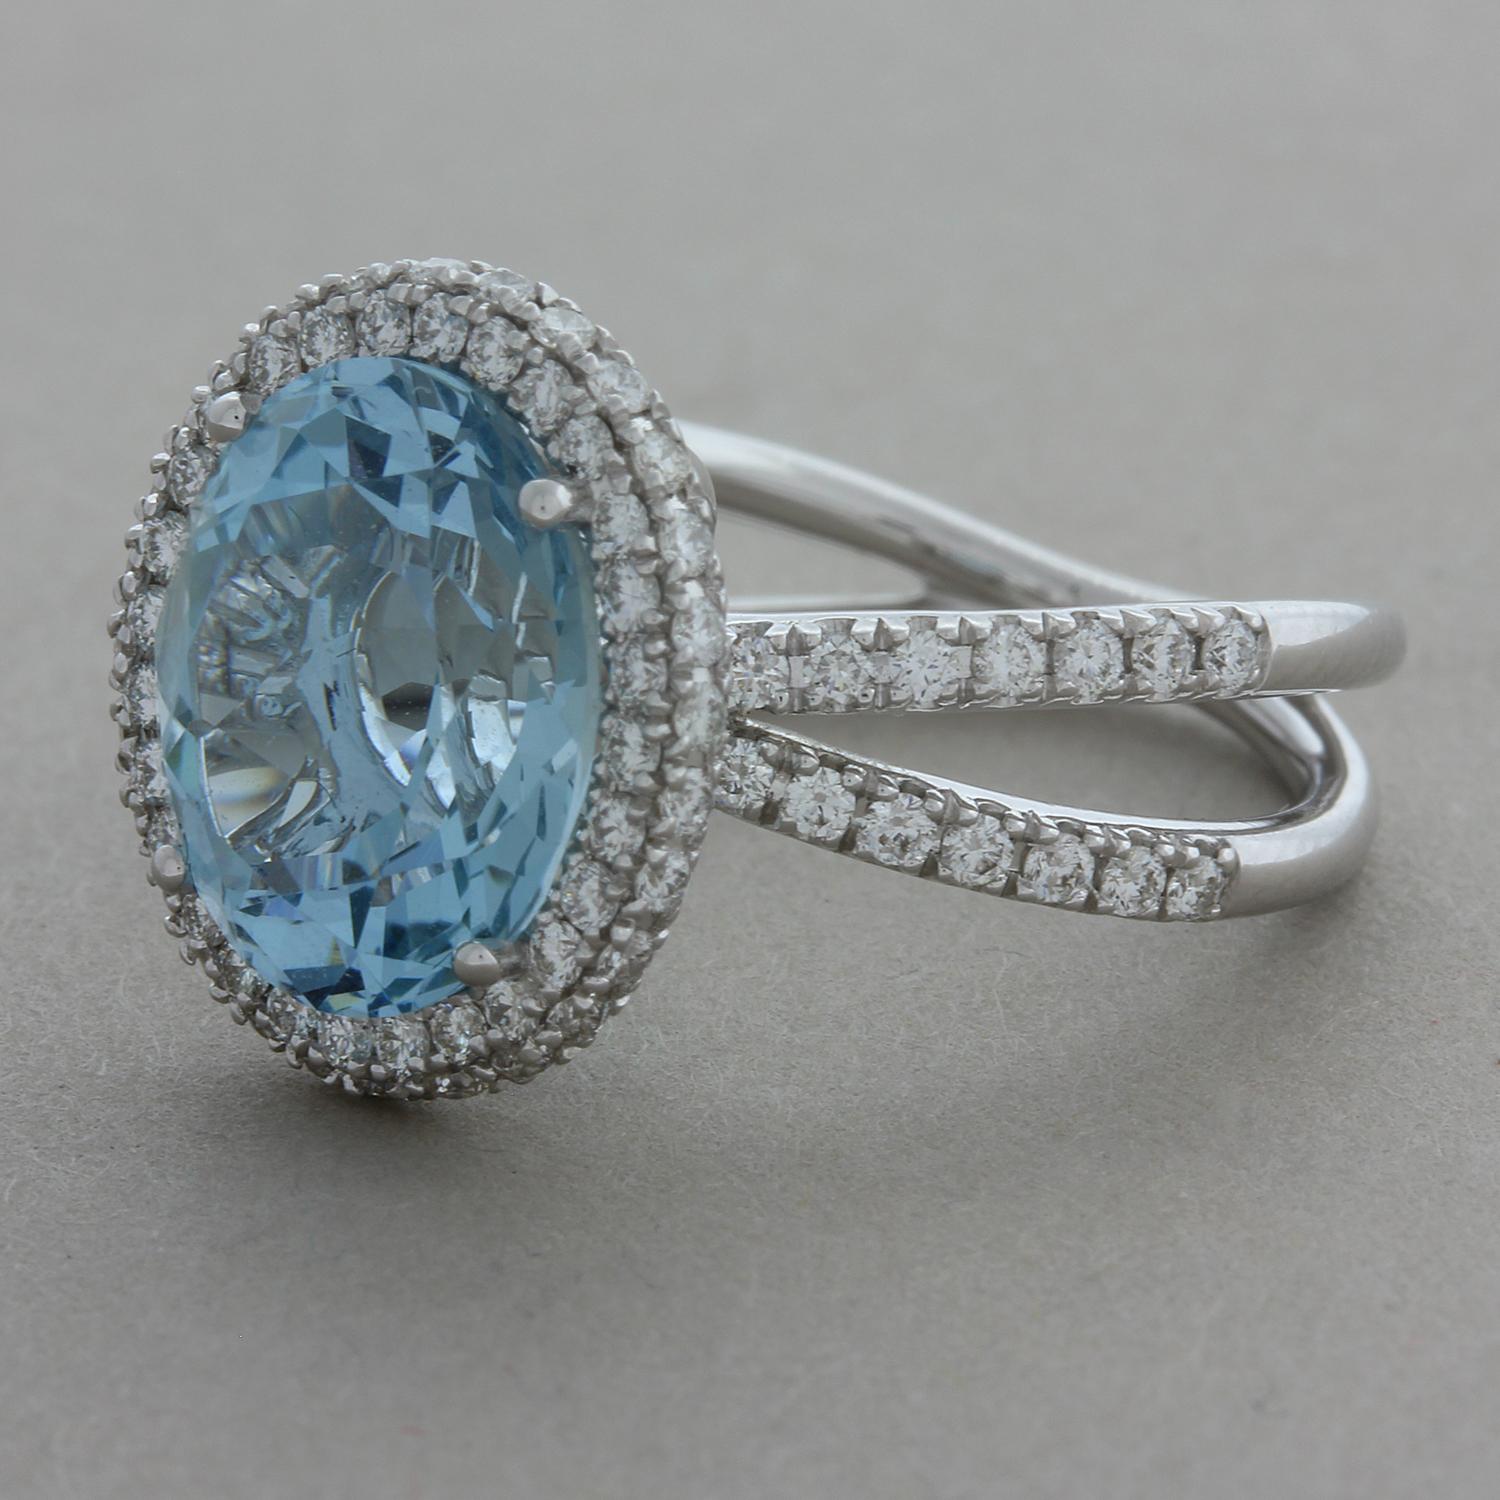 A lovely gem set ring featuring a 4.55 carat oval shaped aquamarine with a lovely blue color that resembles a summer sky. The gemstone is accented by 0.86 carats of round brilliant cut diamonds which halo the gem and run along the shoulders of the